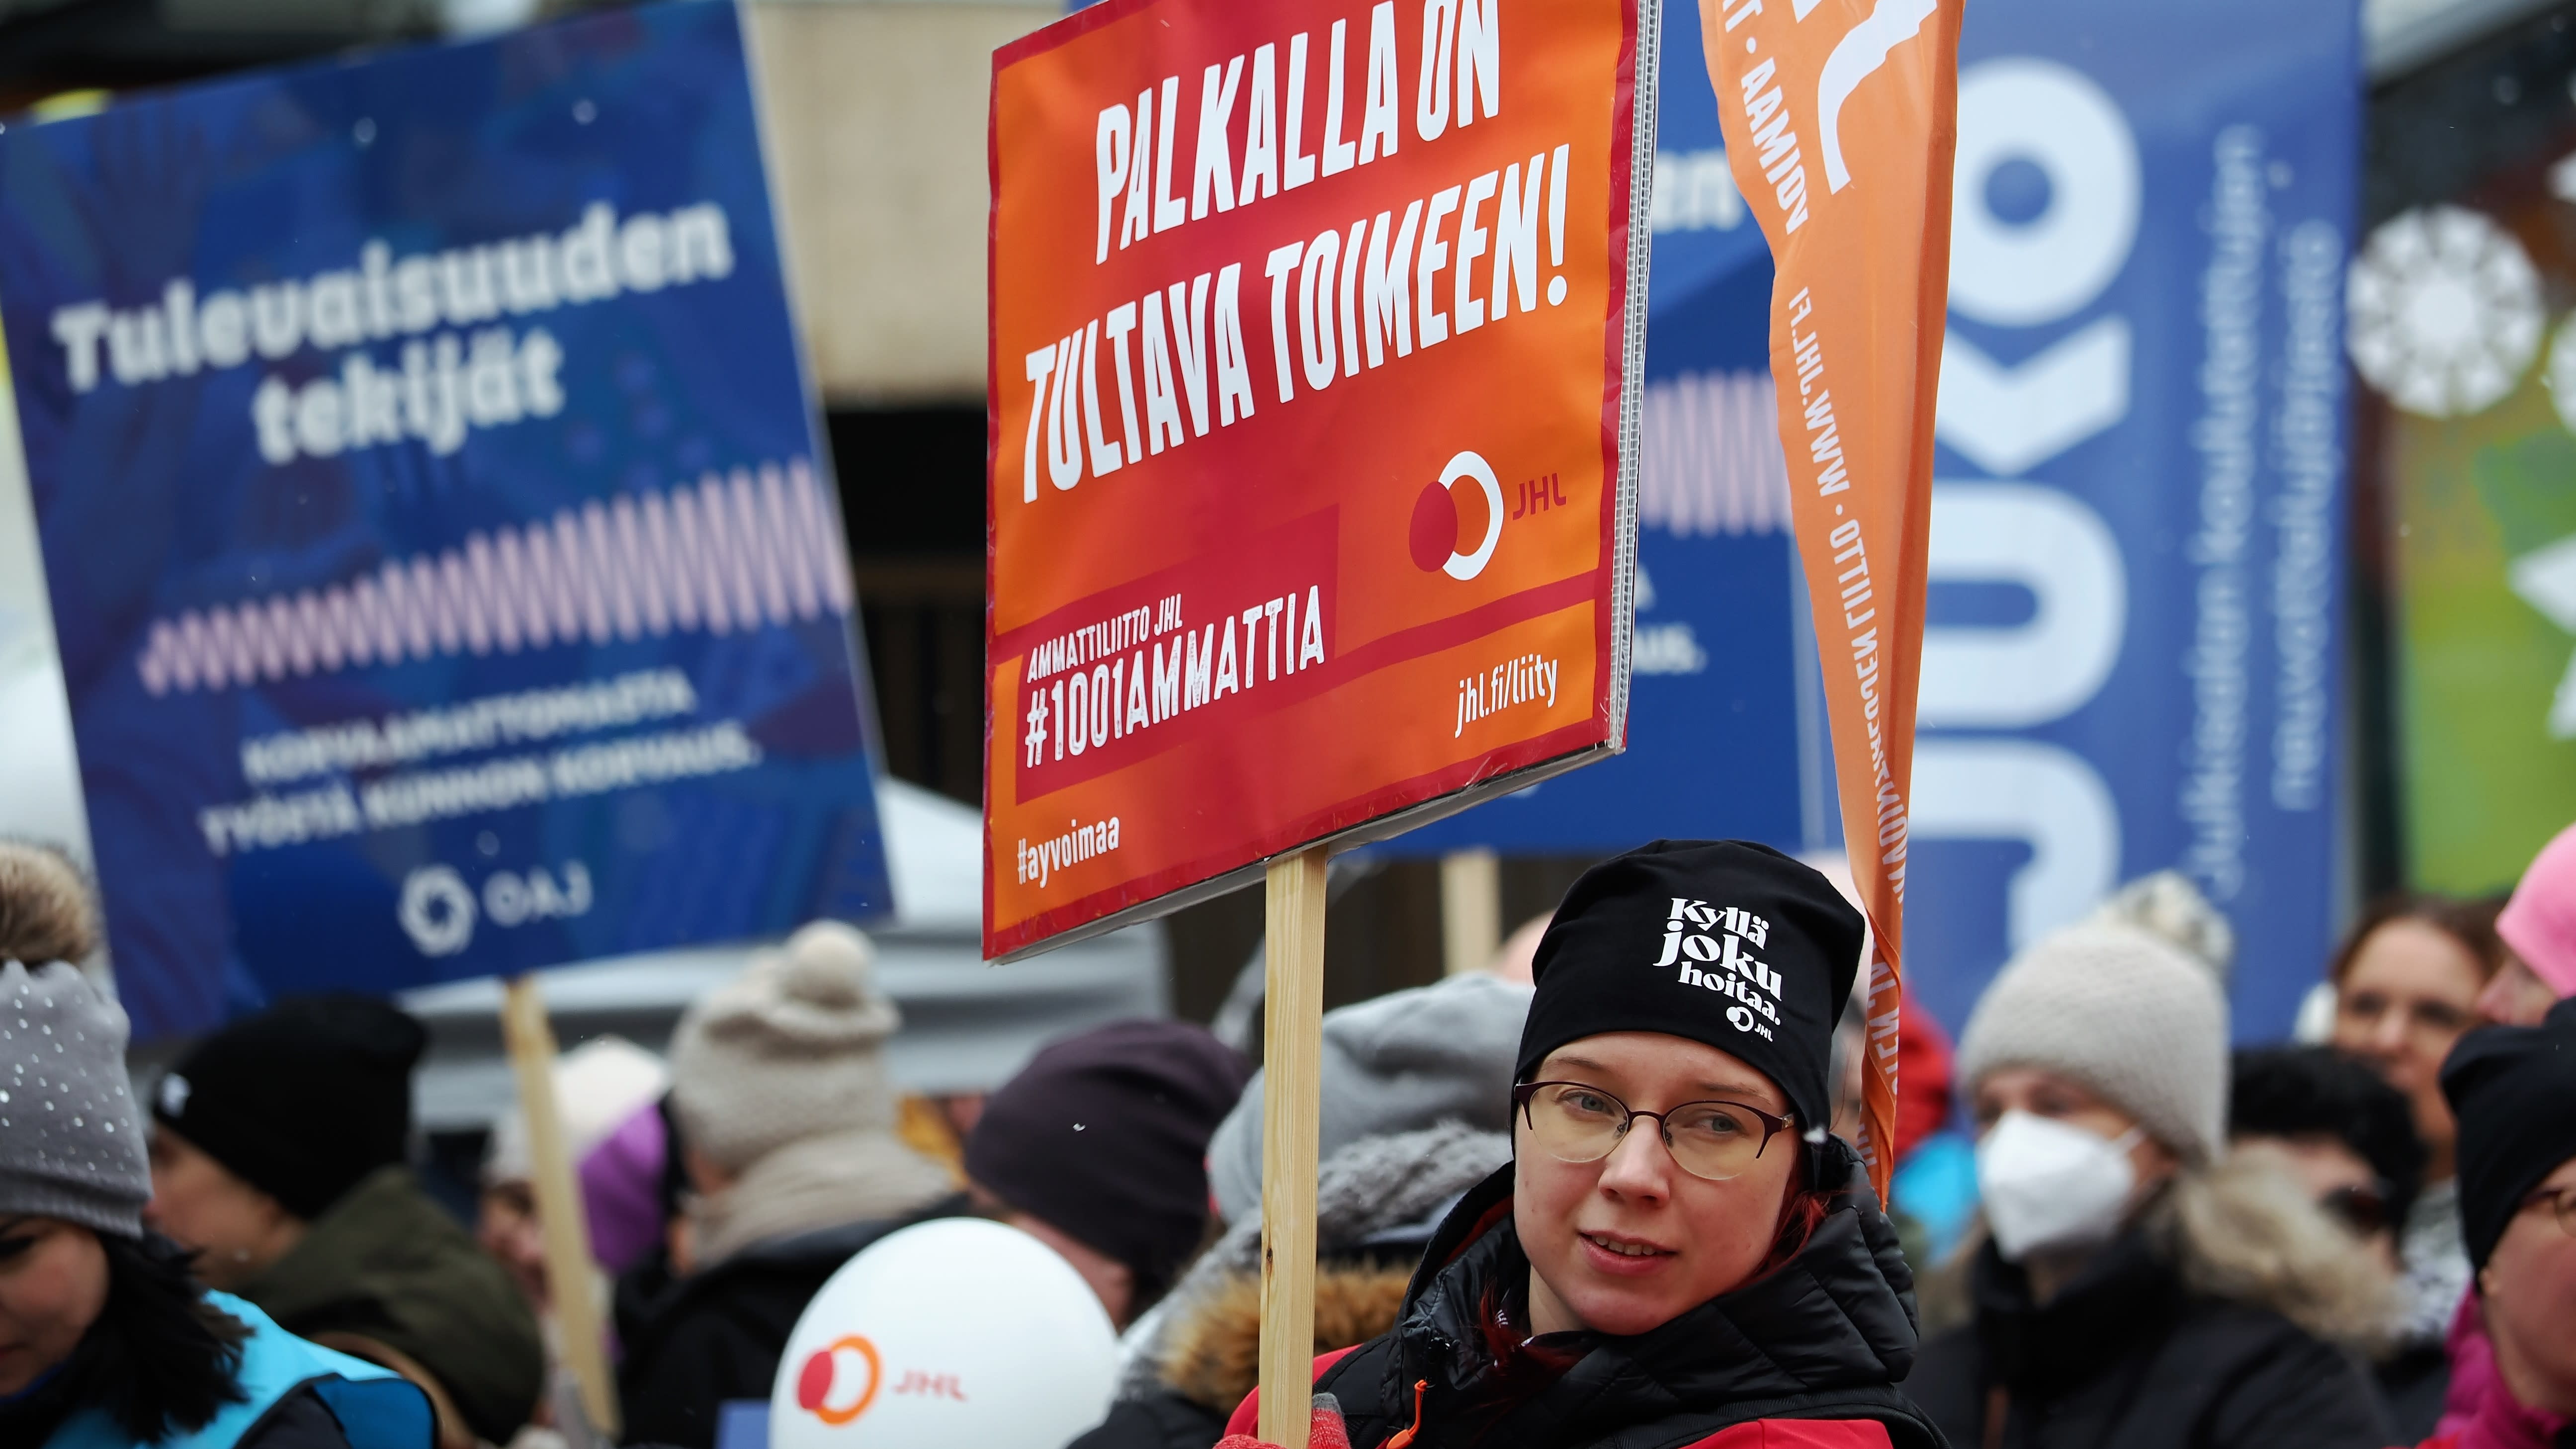 School closures are expected as municipal strikes spread to several Finnish cities